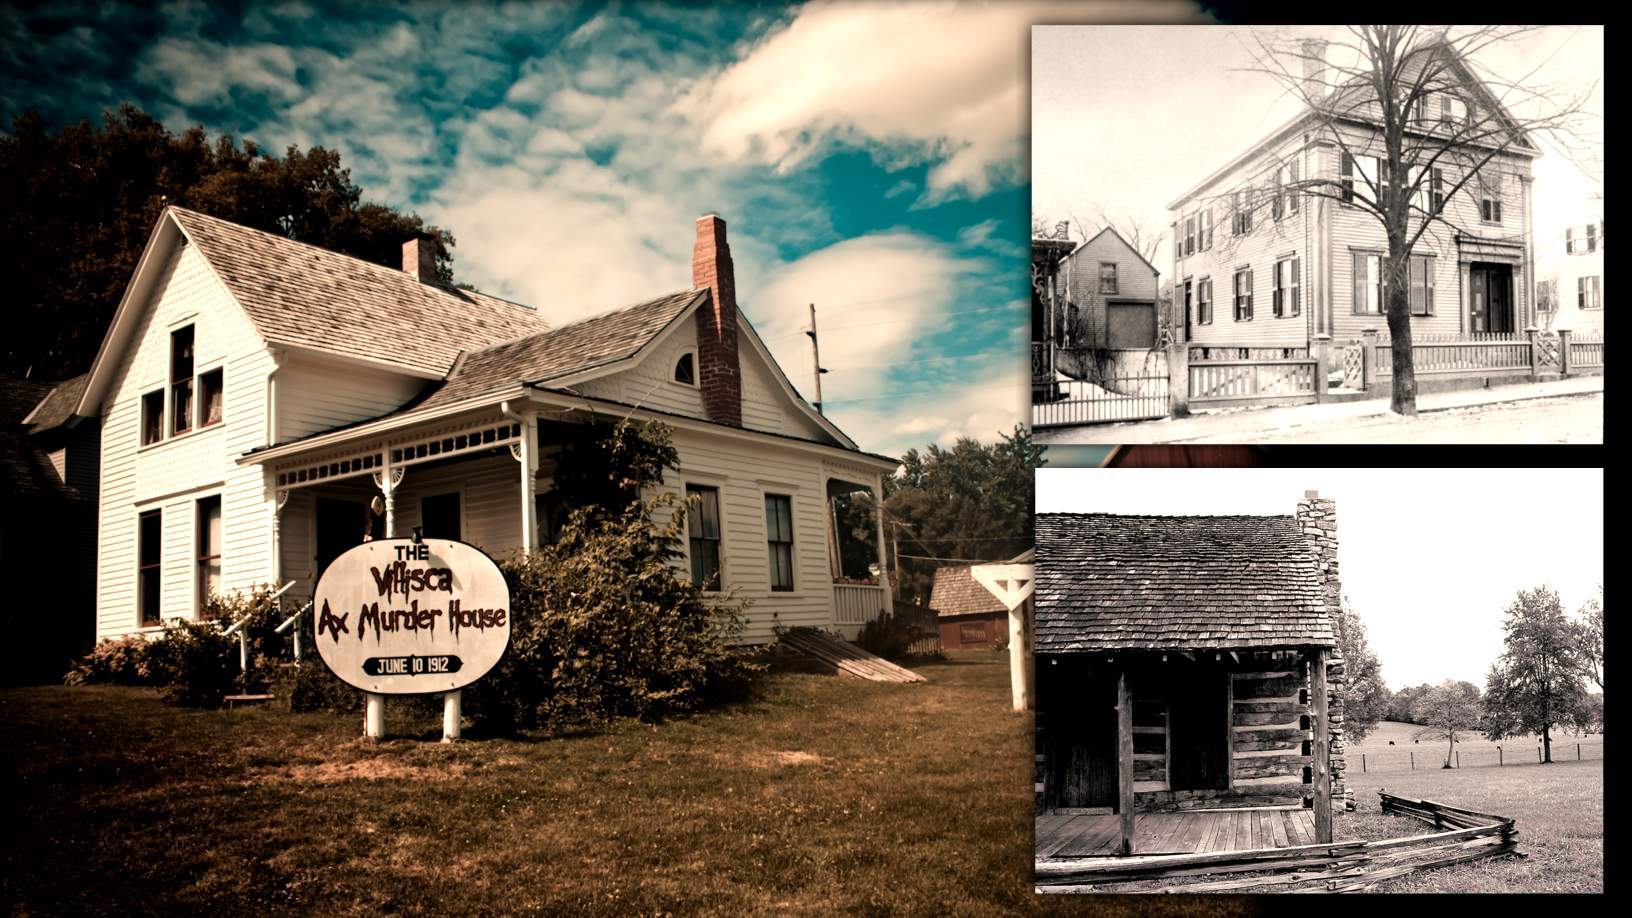 America's 7 most haunted vintage houses 2